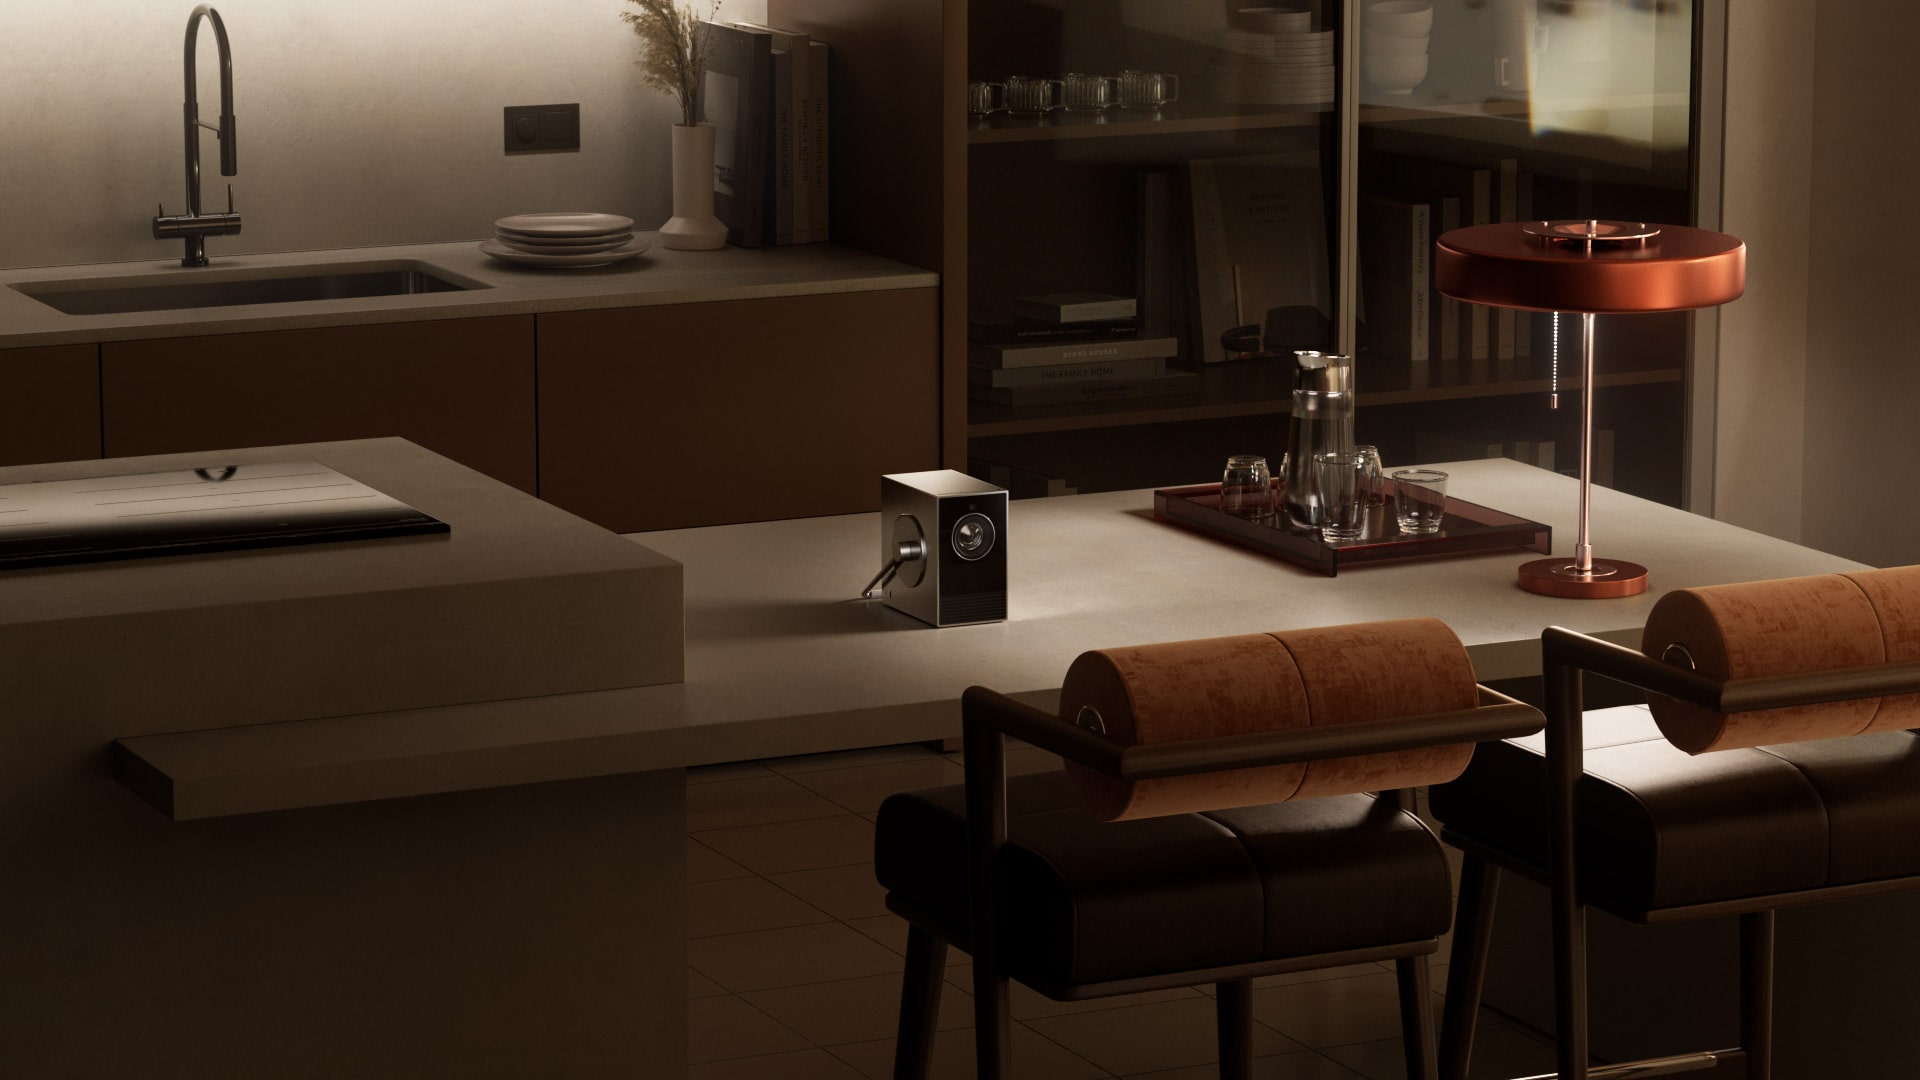 Image of the Cinebeam Q placed in the center of the kitchen island dining table, creating a cinematic atmosphere.